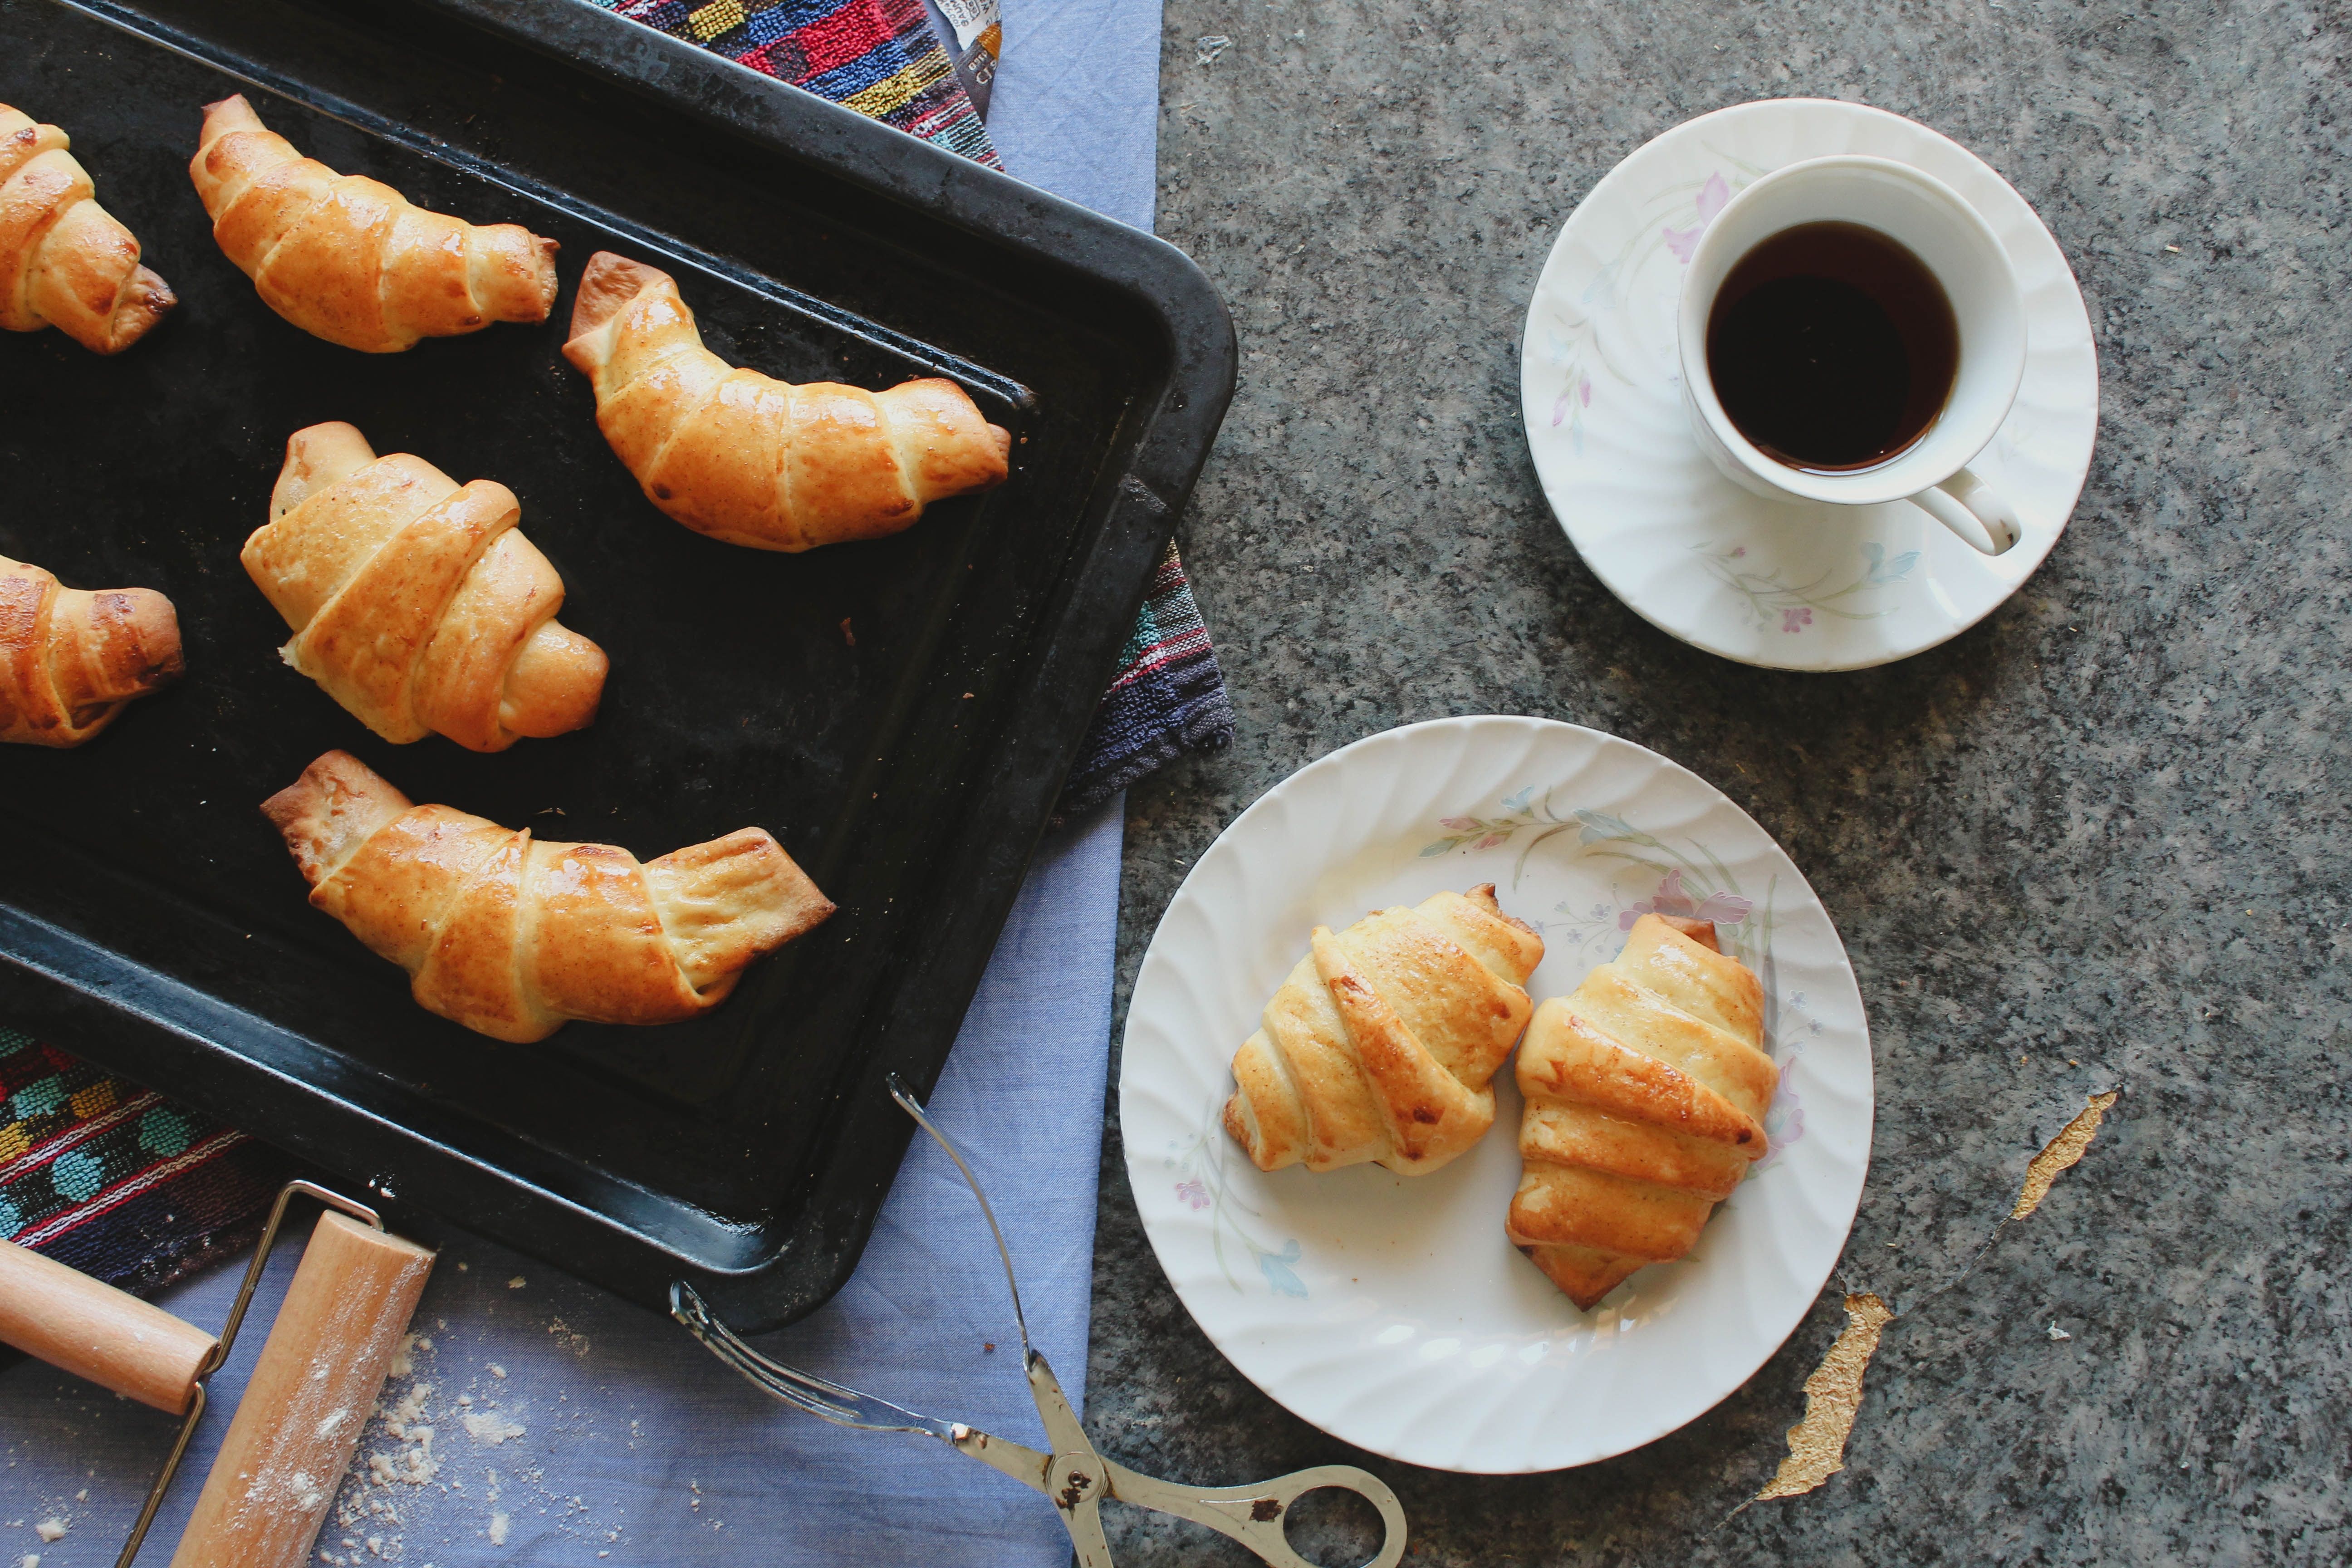 Fresh pastries and dark tea at home in Alexandria, Egypt